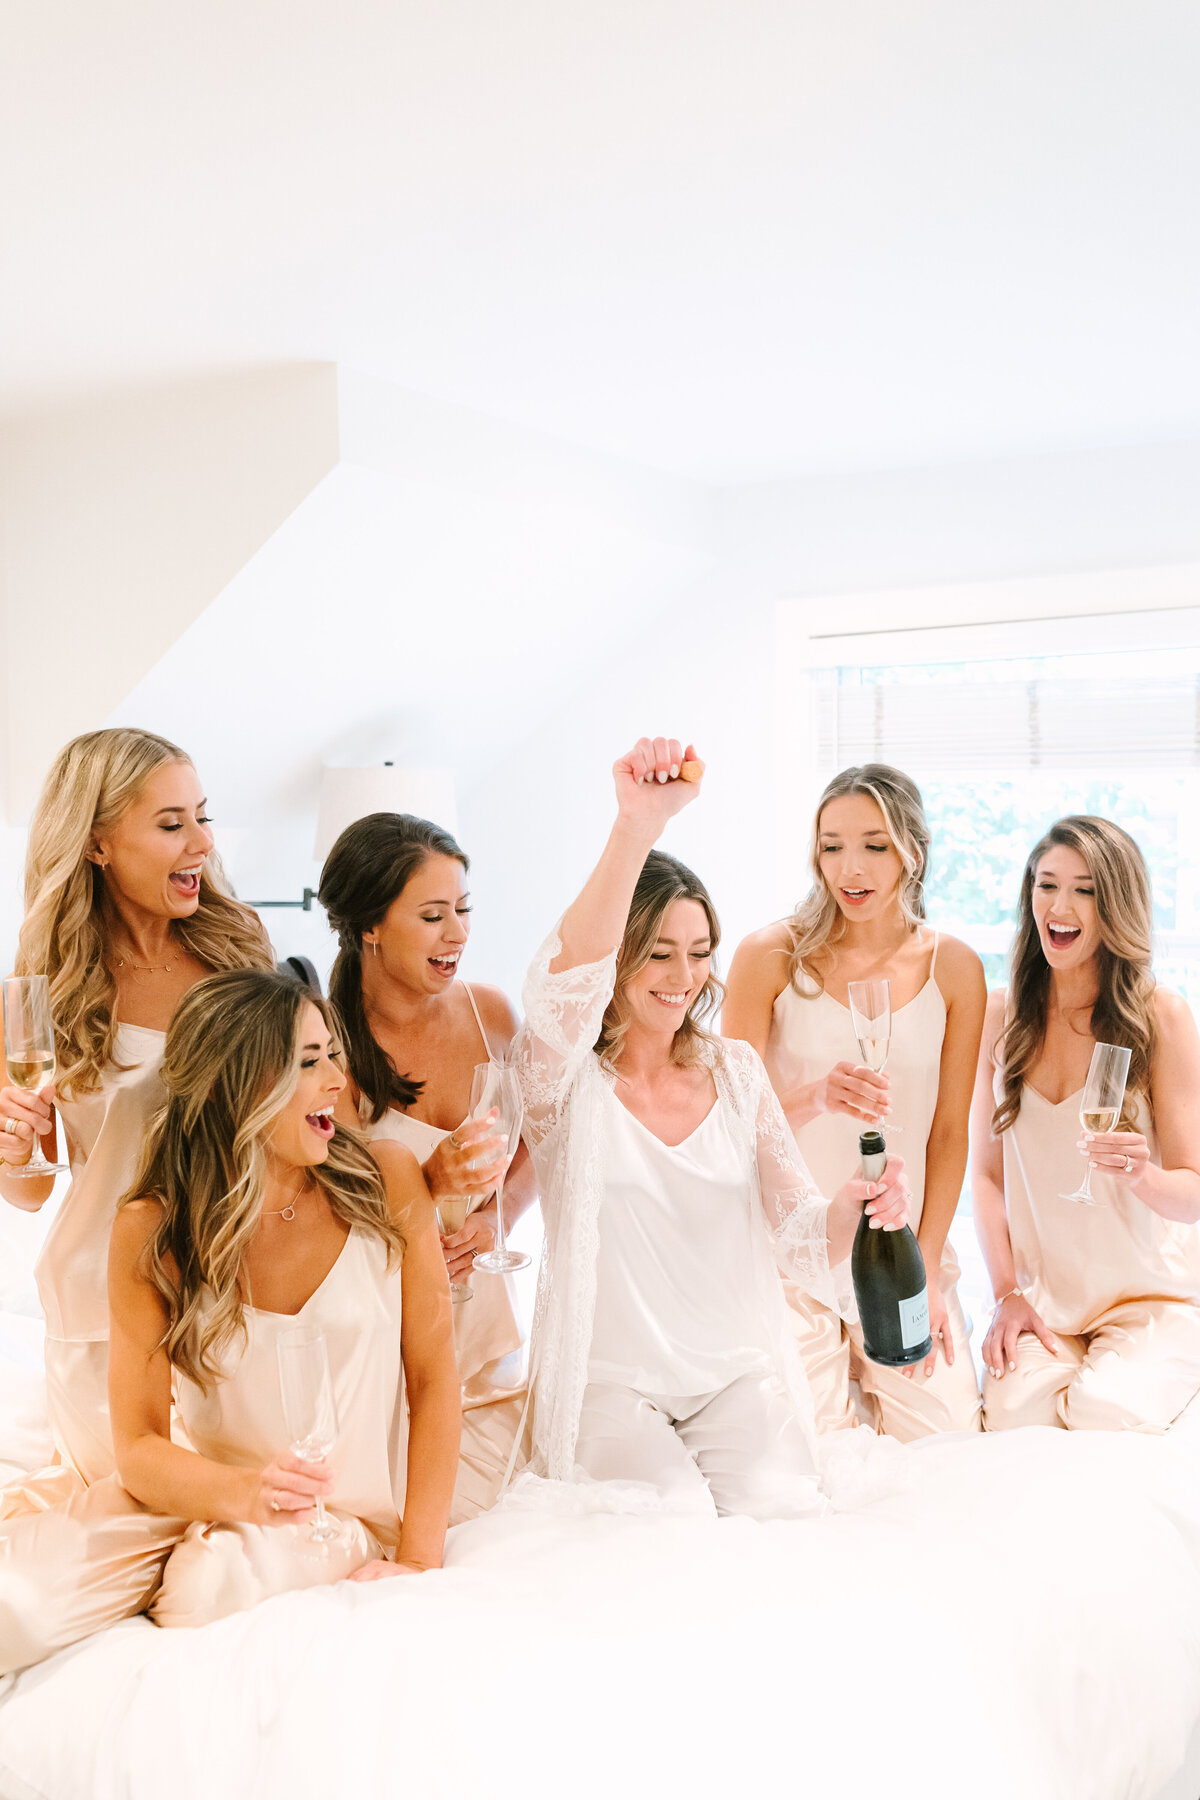 bride with her bridesmaids in soft silk pajamas smiling and opening a bottle of champagne on a hotel bed.